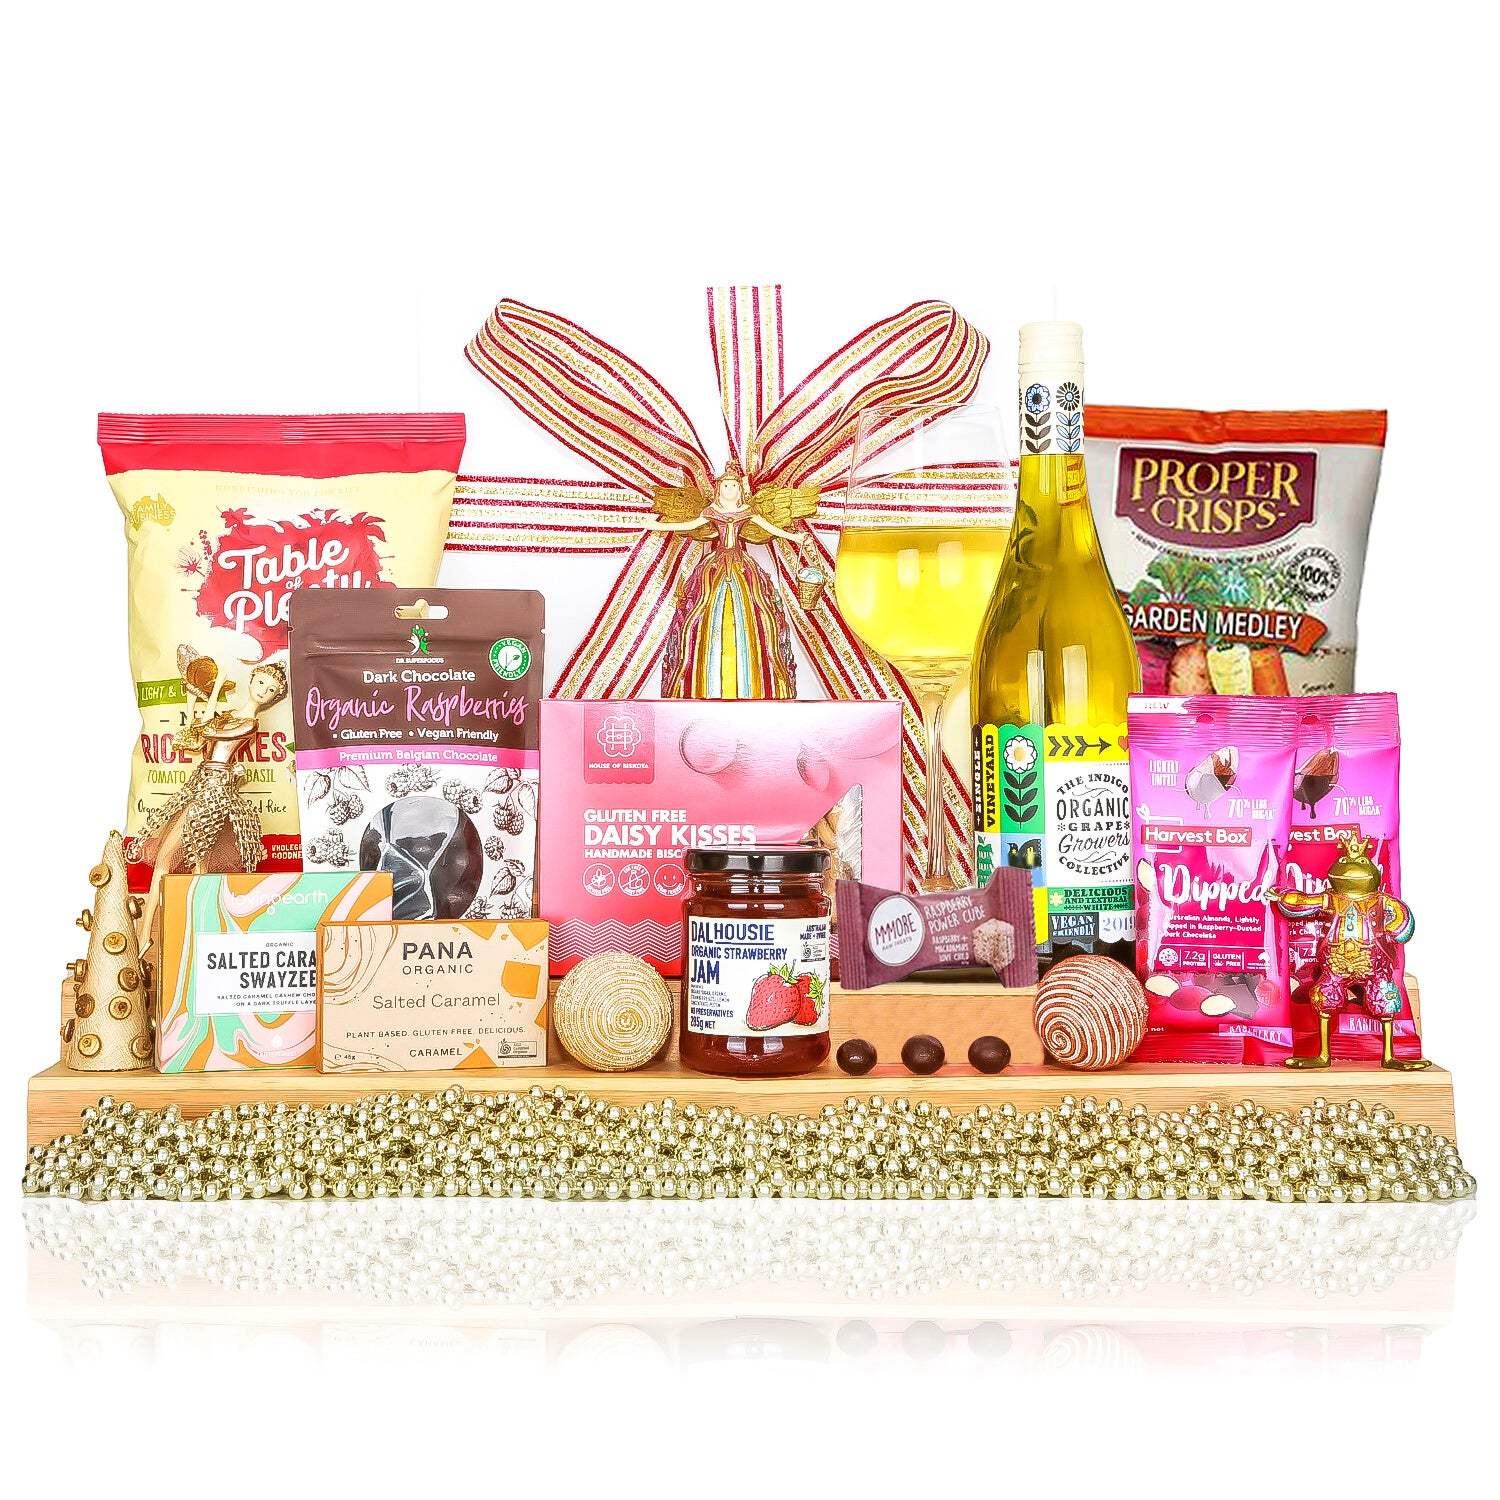 All I Want For Christmas - Healthy Belly Hampers - pure indulgence - birthday hampers - gift hampers - gift hampers melbourne - gift hampers australia - organic hampers -vegan hampers - gluten free hampers - birthday hampers -anniversary hampers - wedding hampers - alcohol hampers